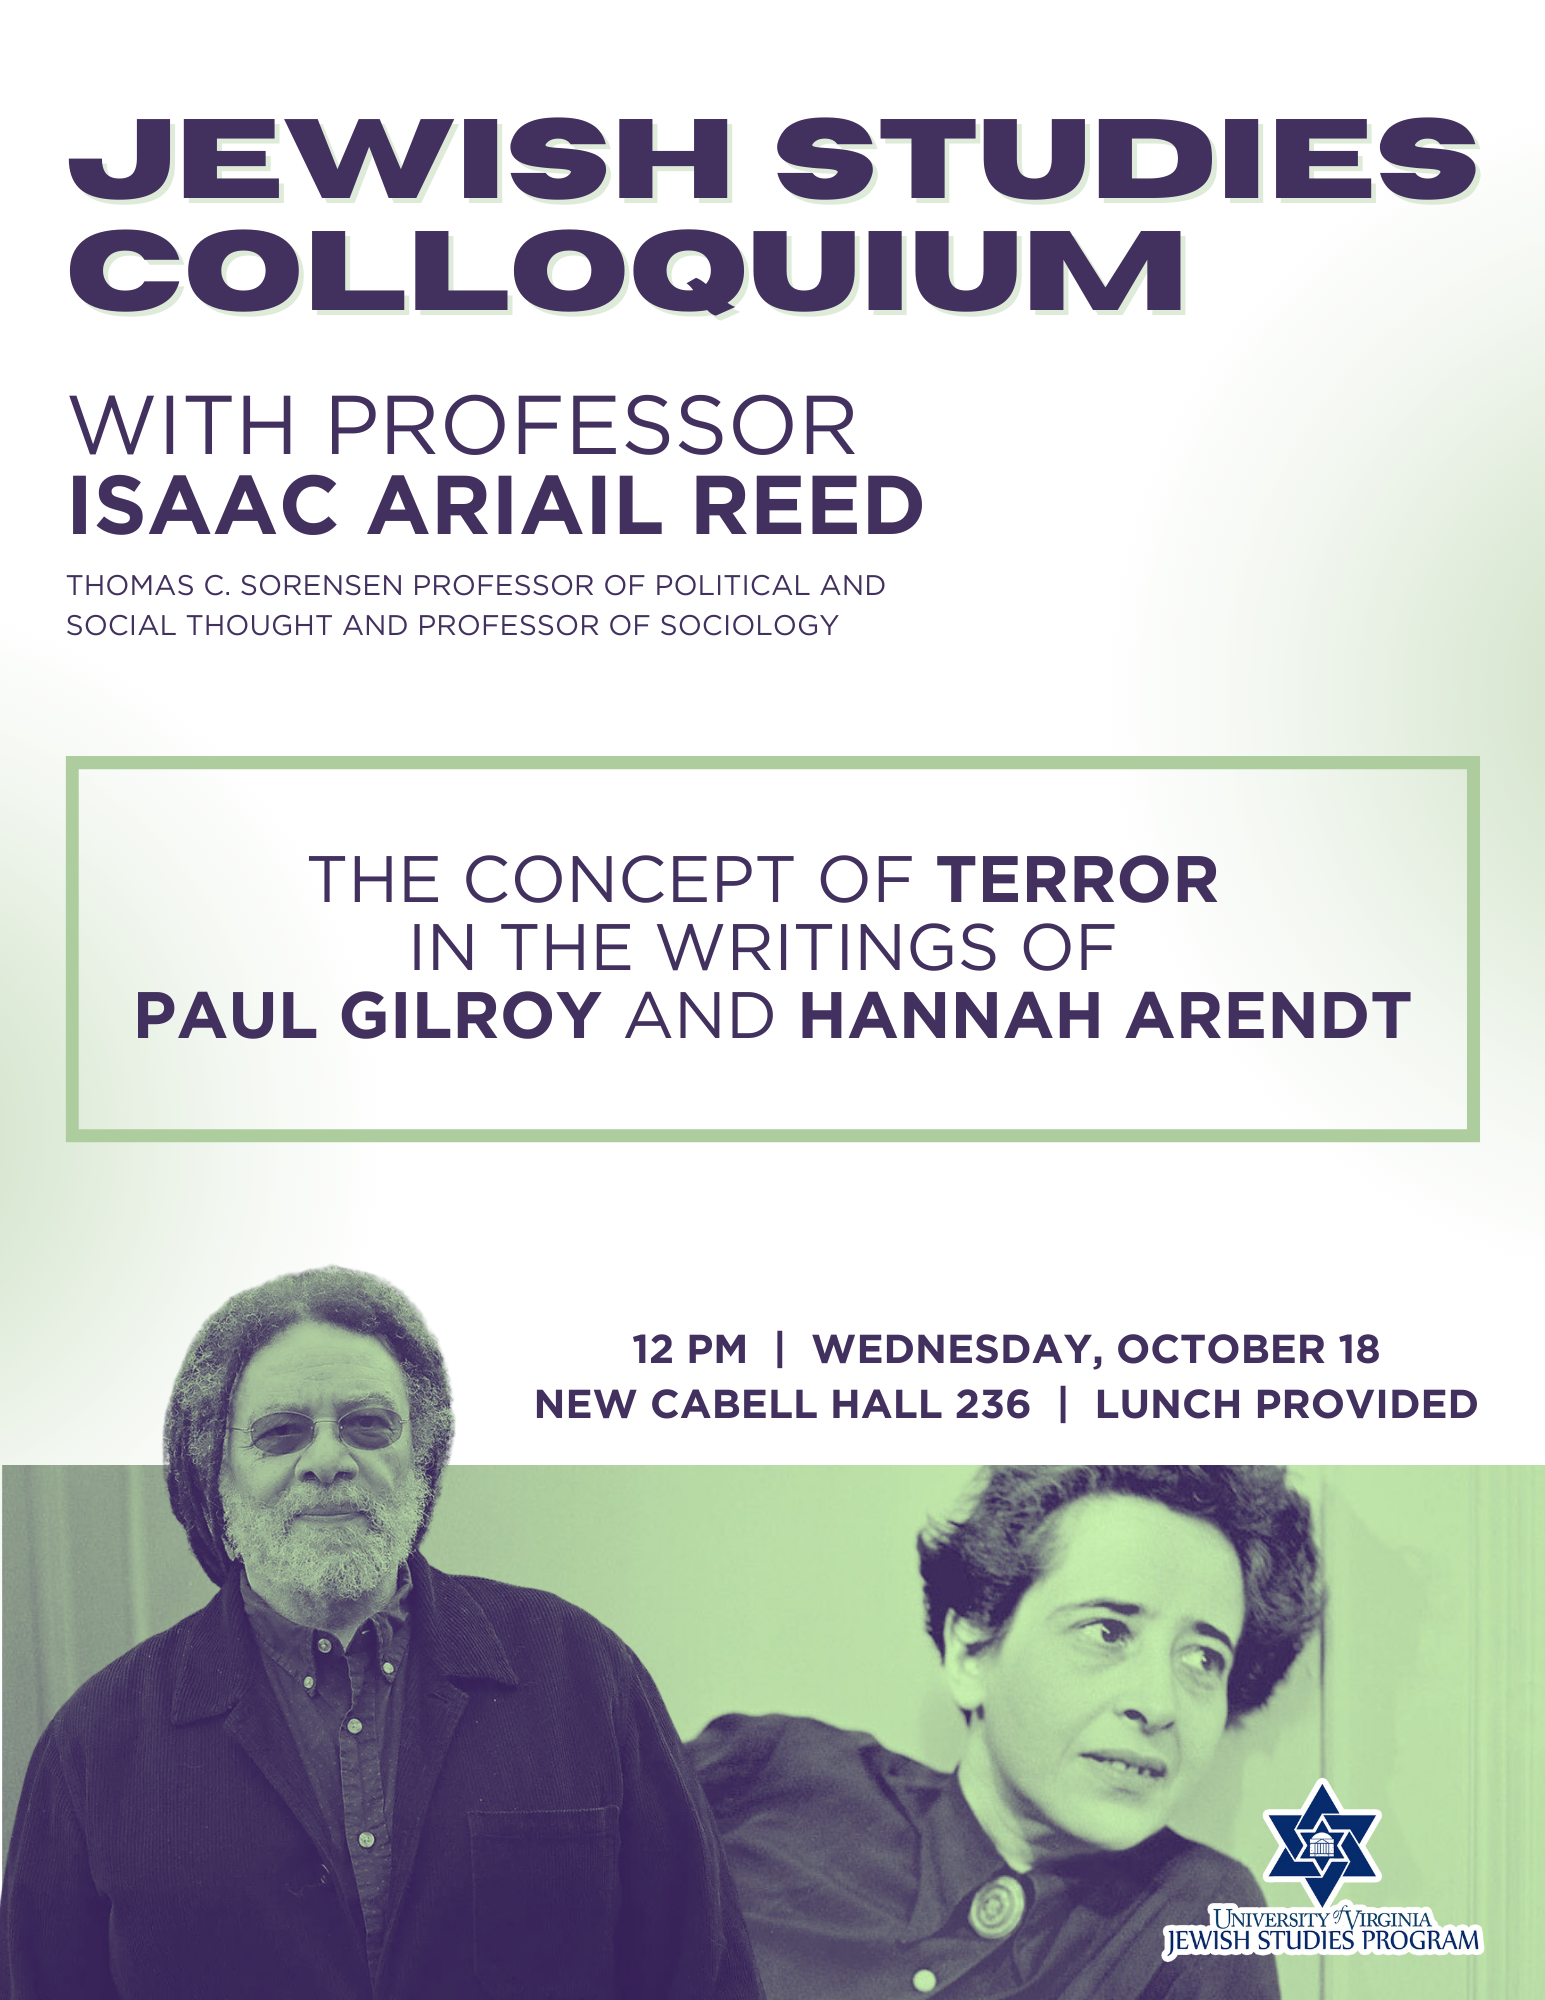 JS Colloquium with Professor Isaac Ariail Reed